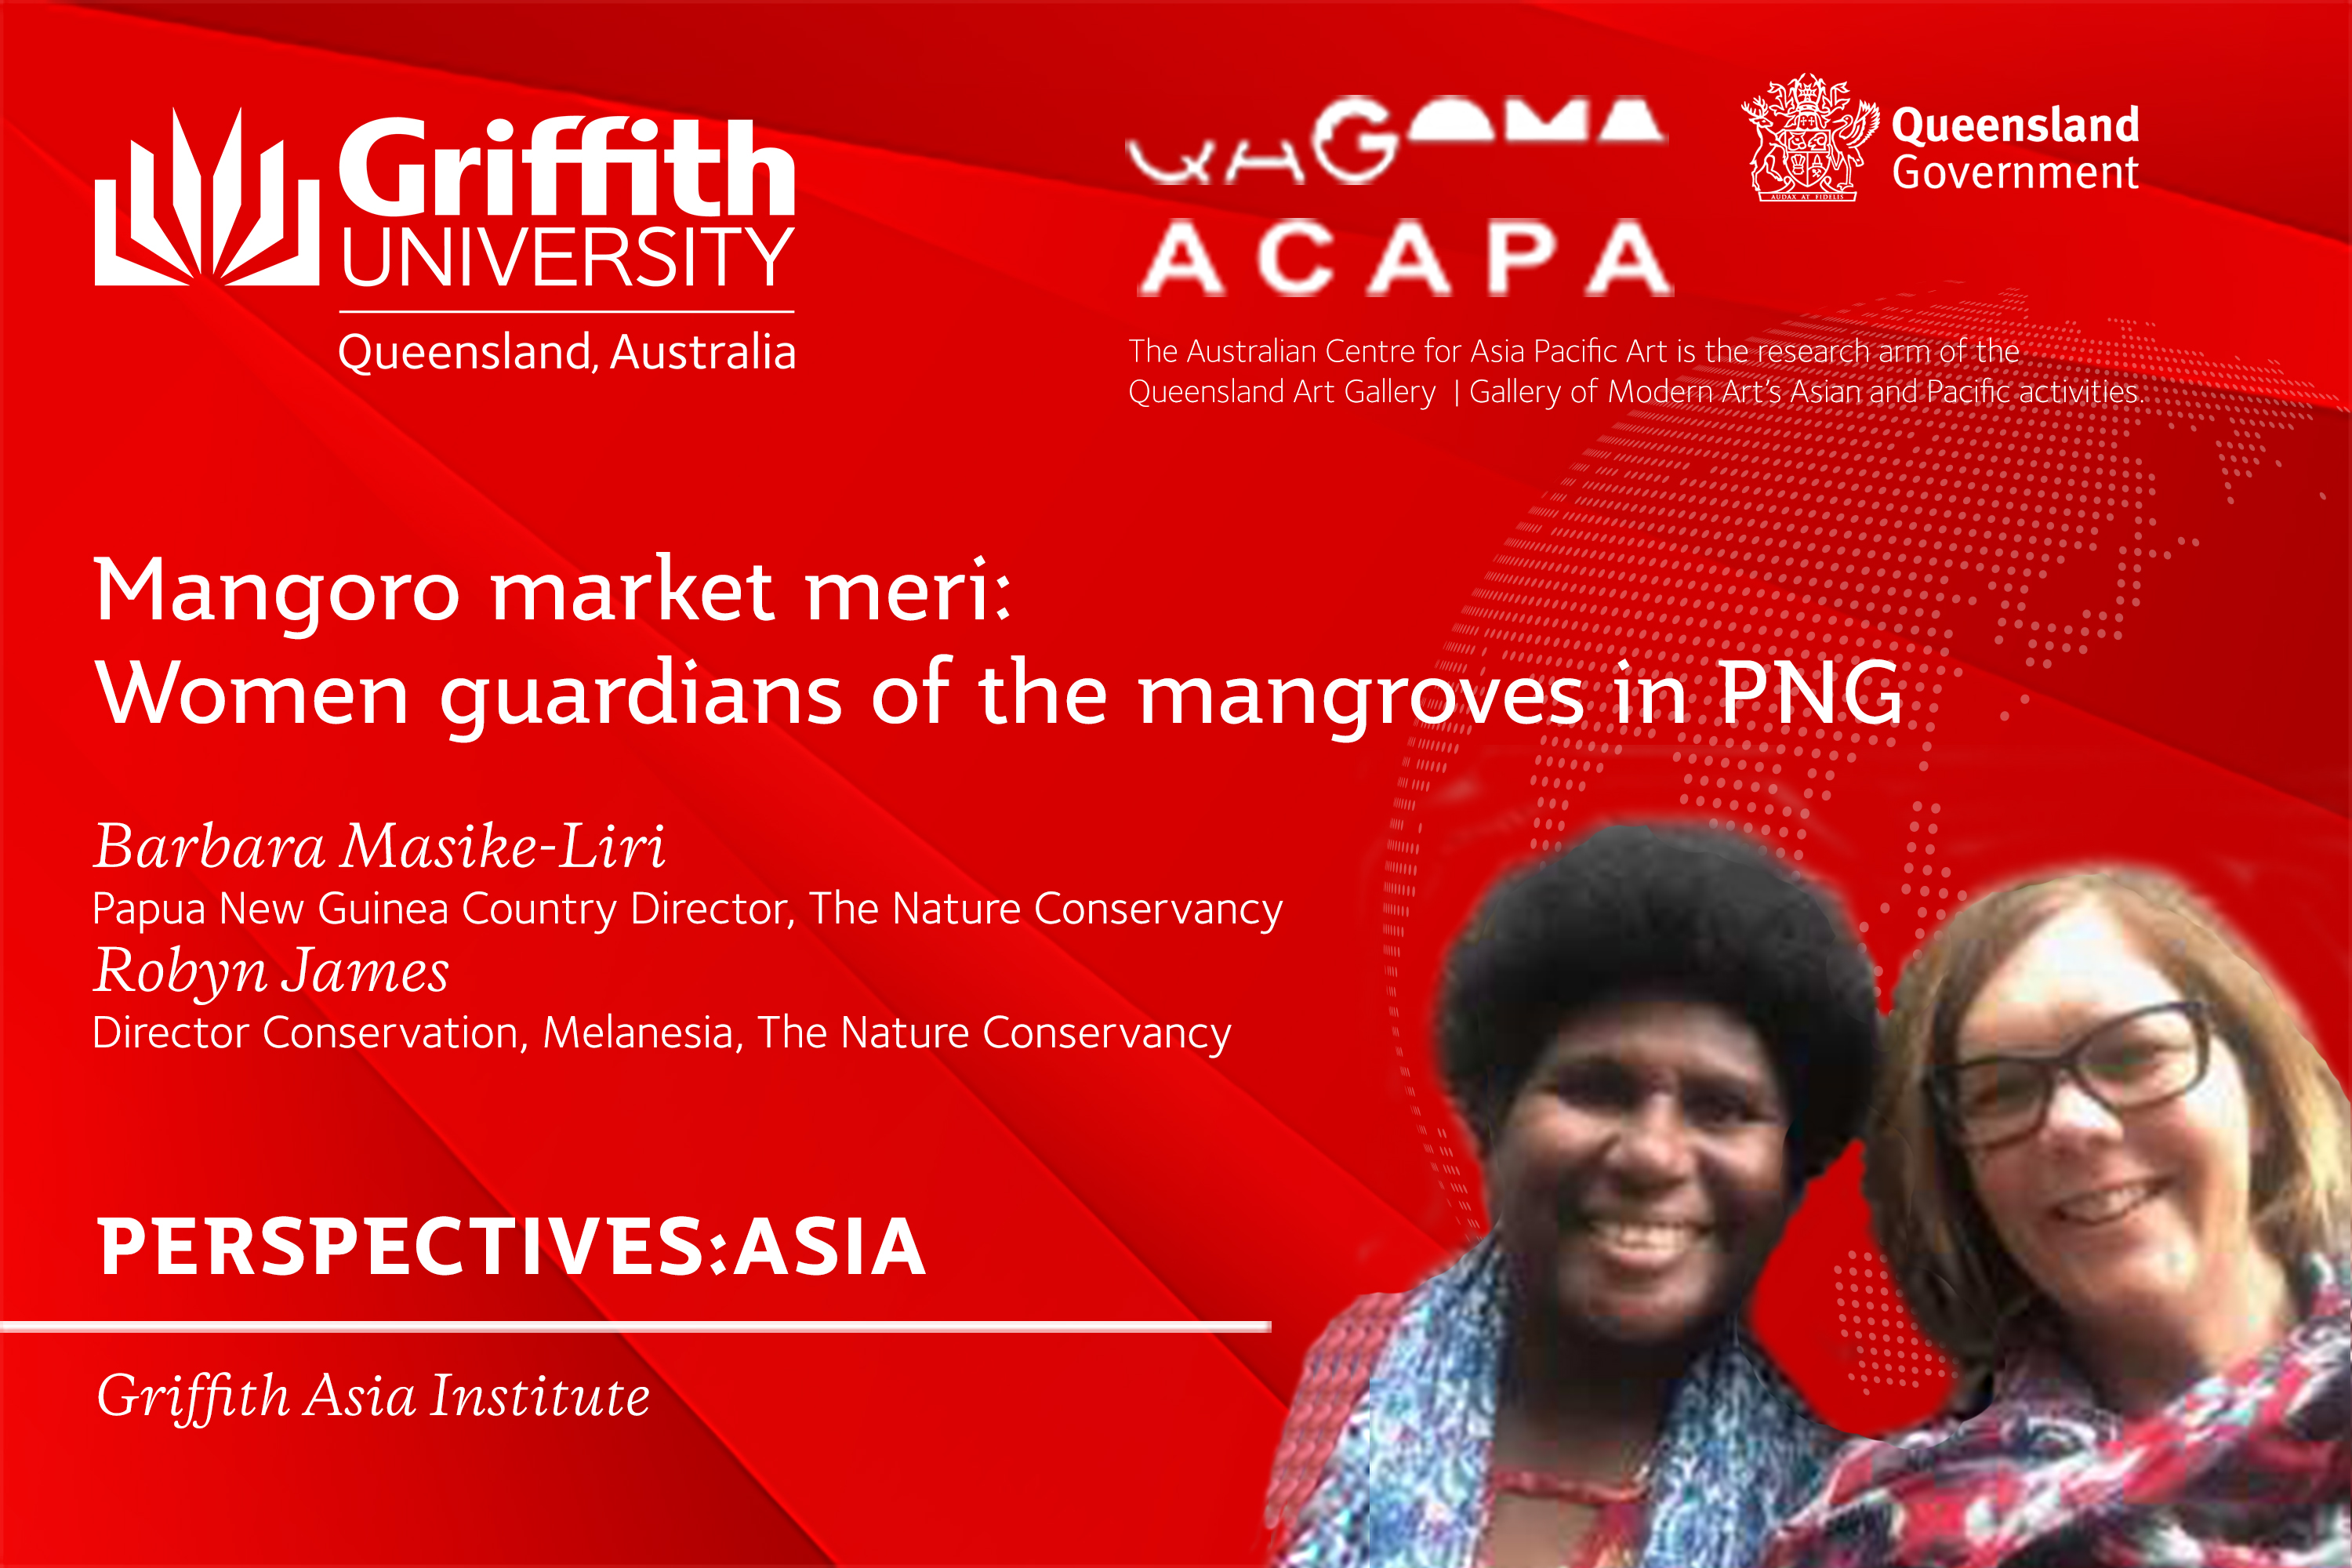 Perspectives:Asia Lecture: Mangoro market meri: Women guardians of the mangroves in PNG